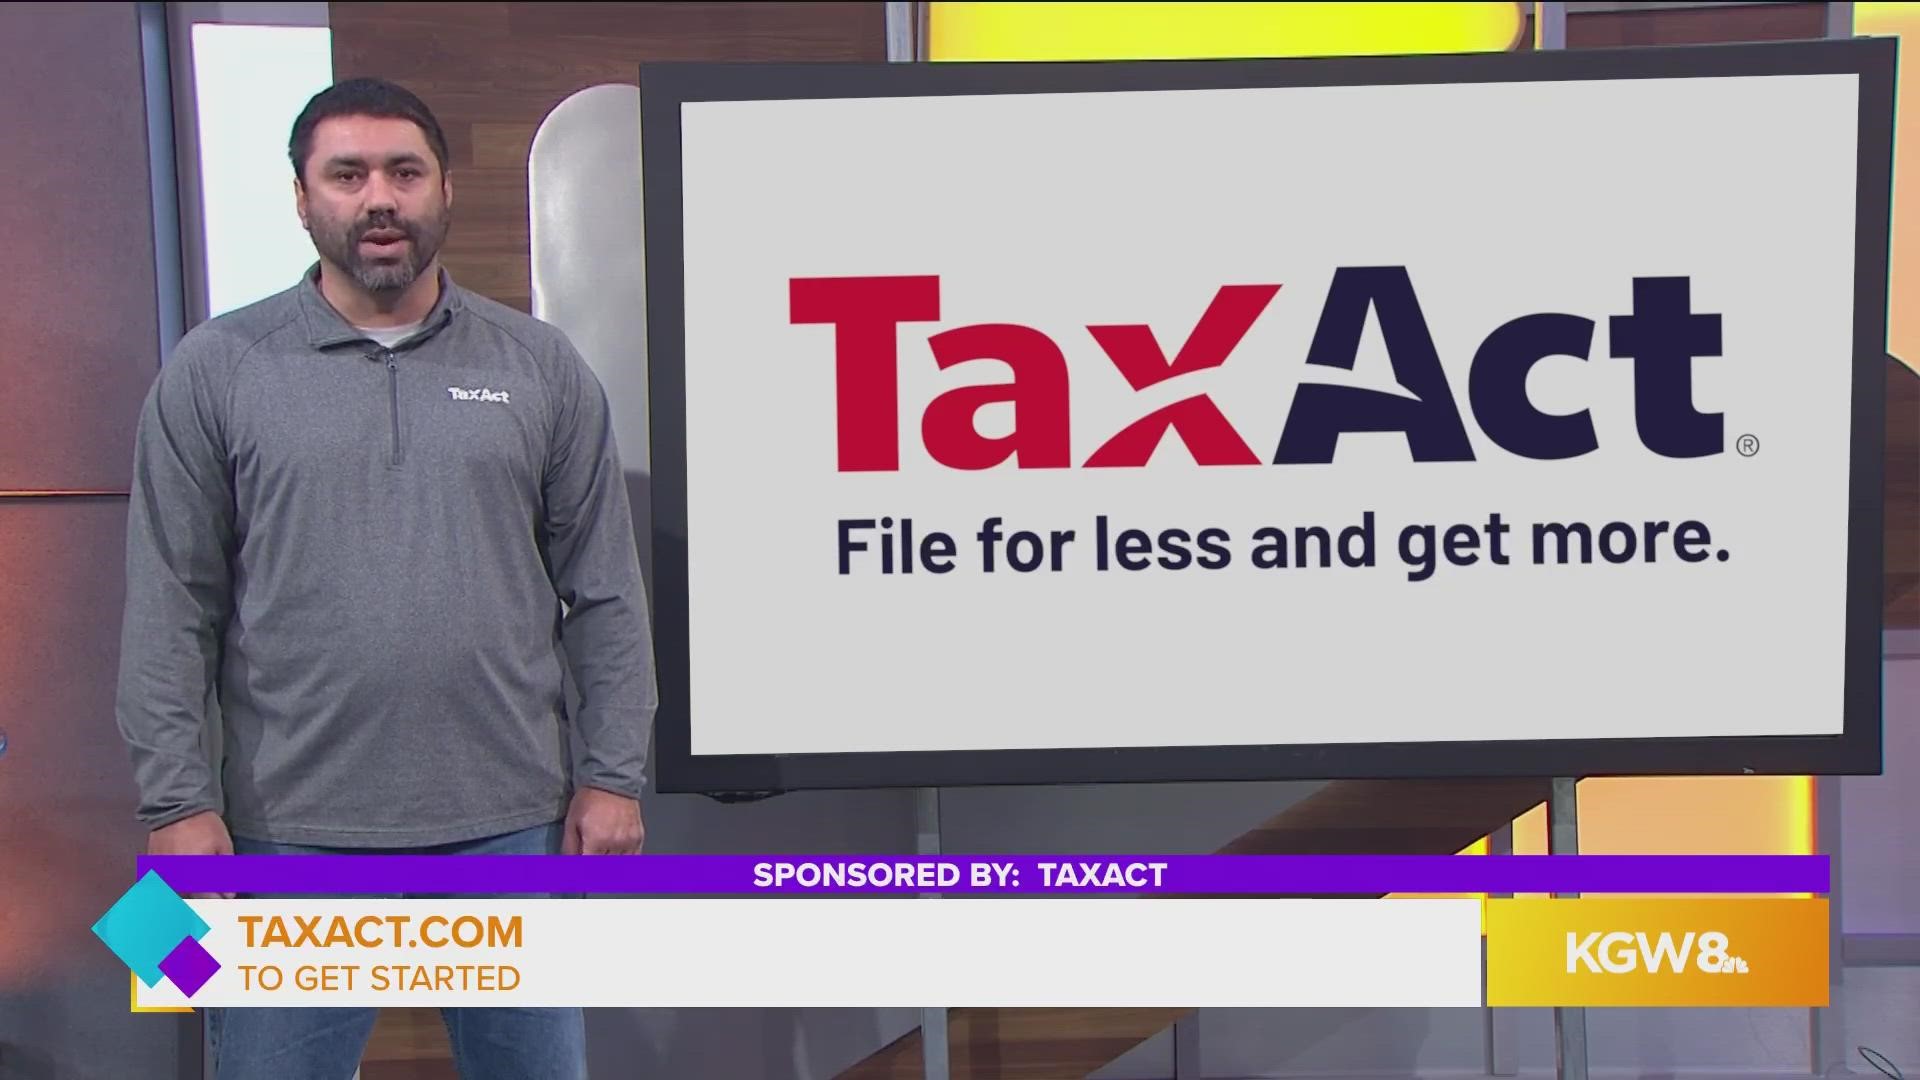 This segment is sponsored by TaxAct